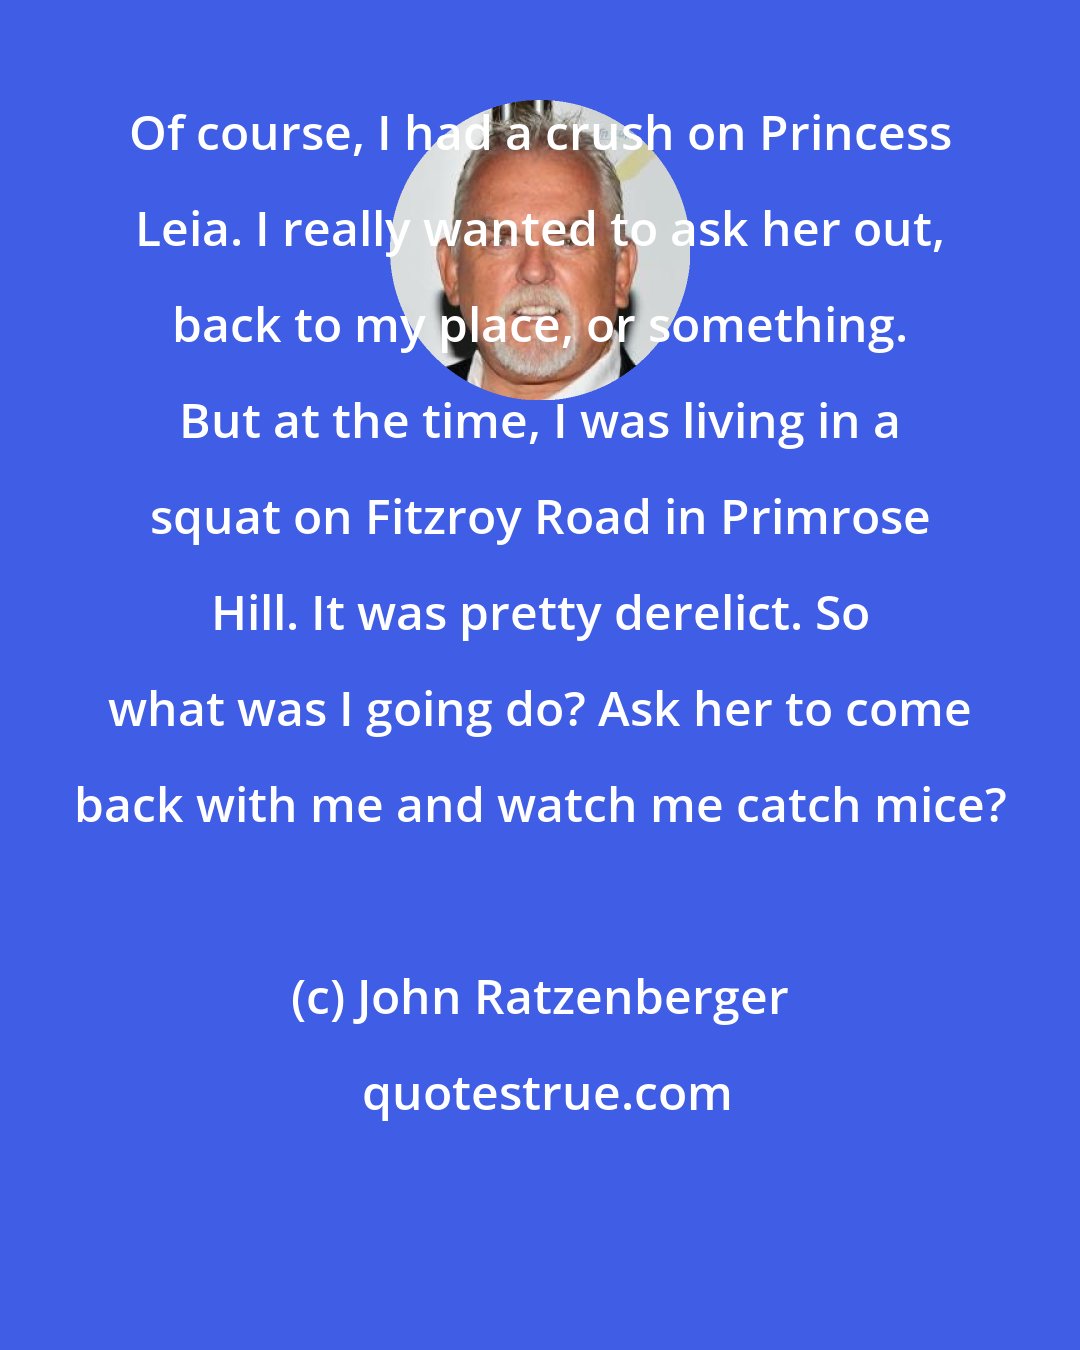 John Ratzenberger: Of course, I had a crush on Princess Leia. I really wanted to ask her out, back to my place, or something. But at the time, I was living in a squat on Fitzroy Road in Primrose Hill. It was pretty derelict. So what was I going do? Ask her to come back with me and watch me catch mice?